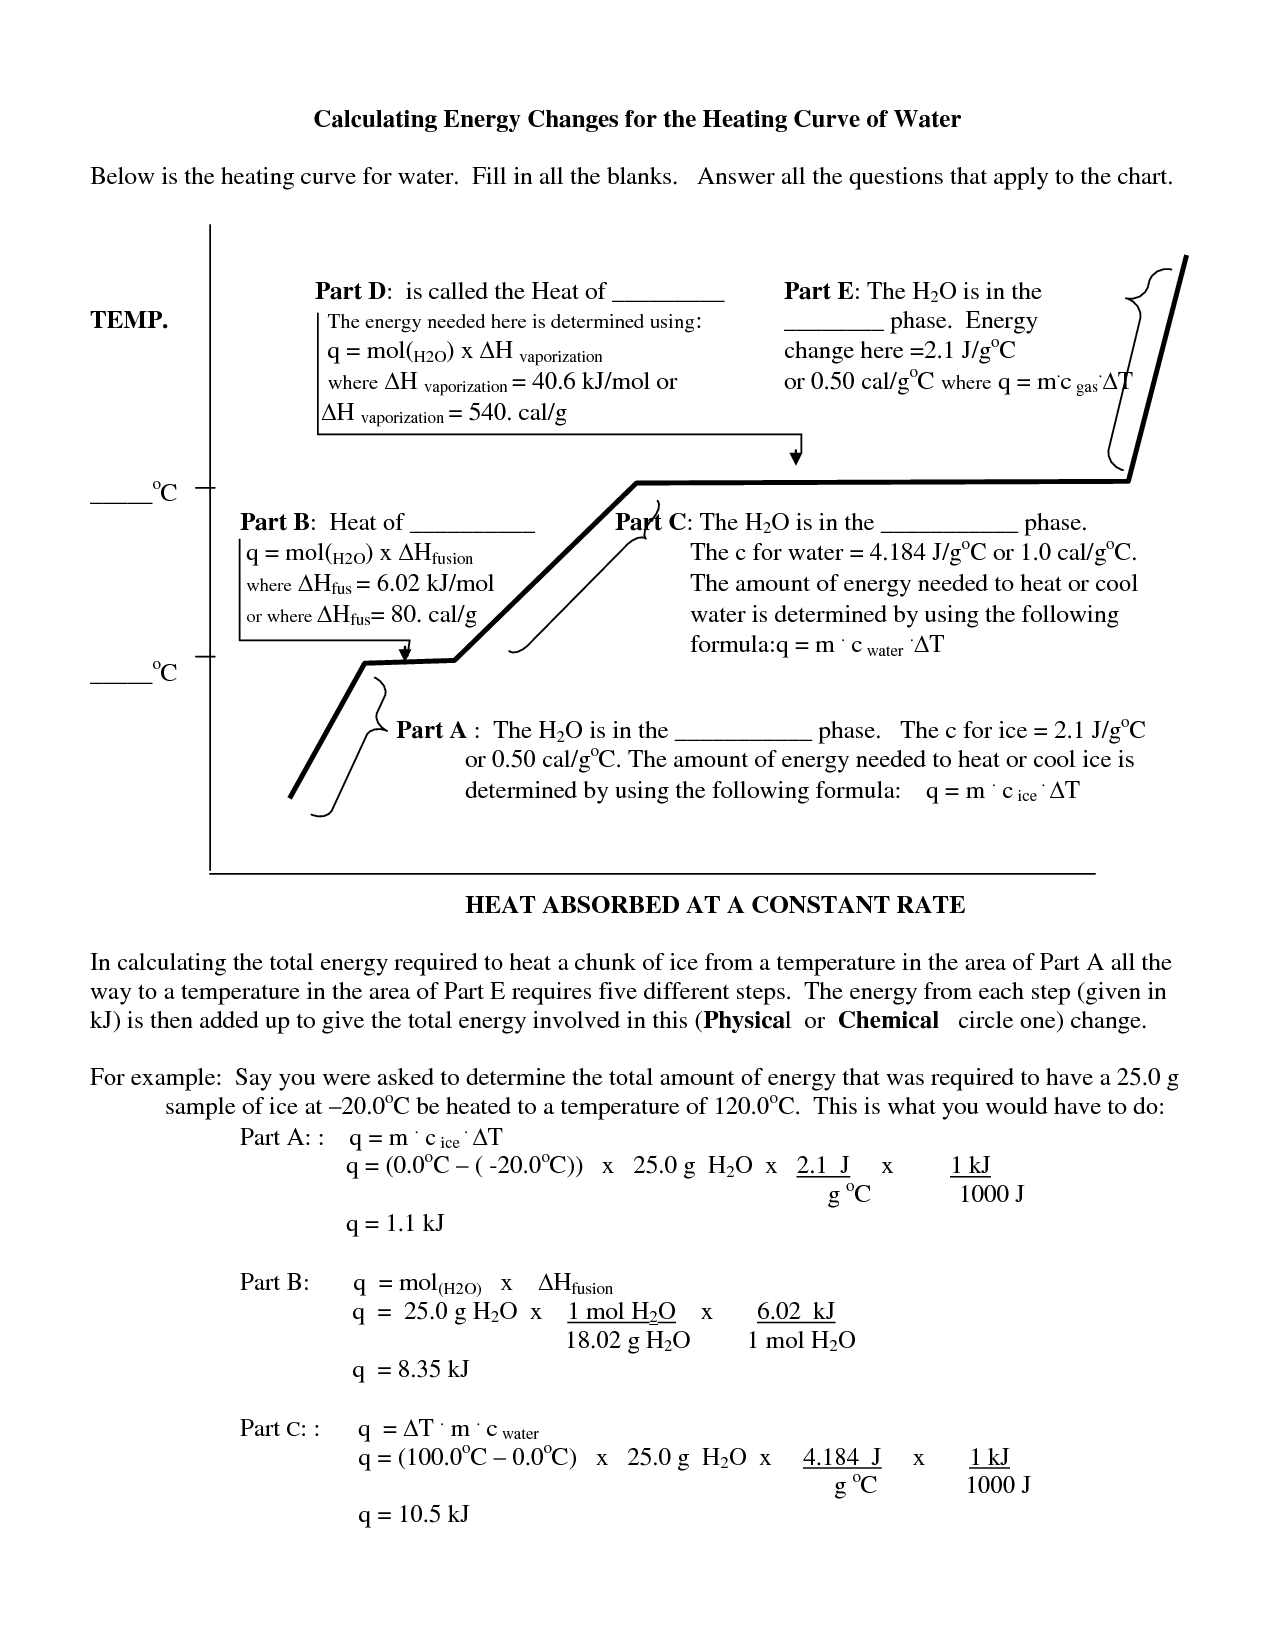 Heating Curve of Water Worksheet Answers Image